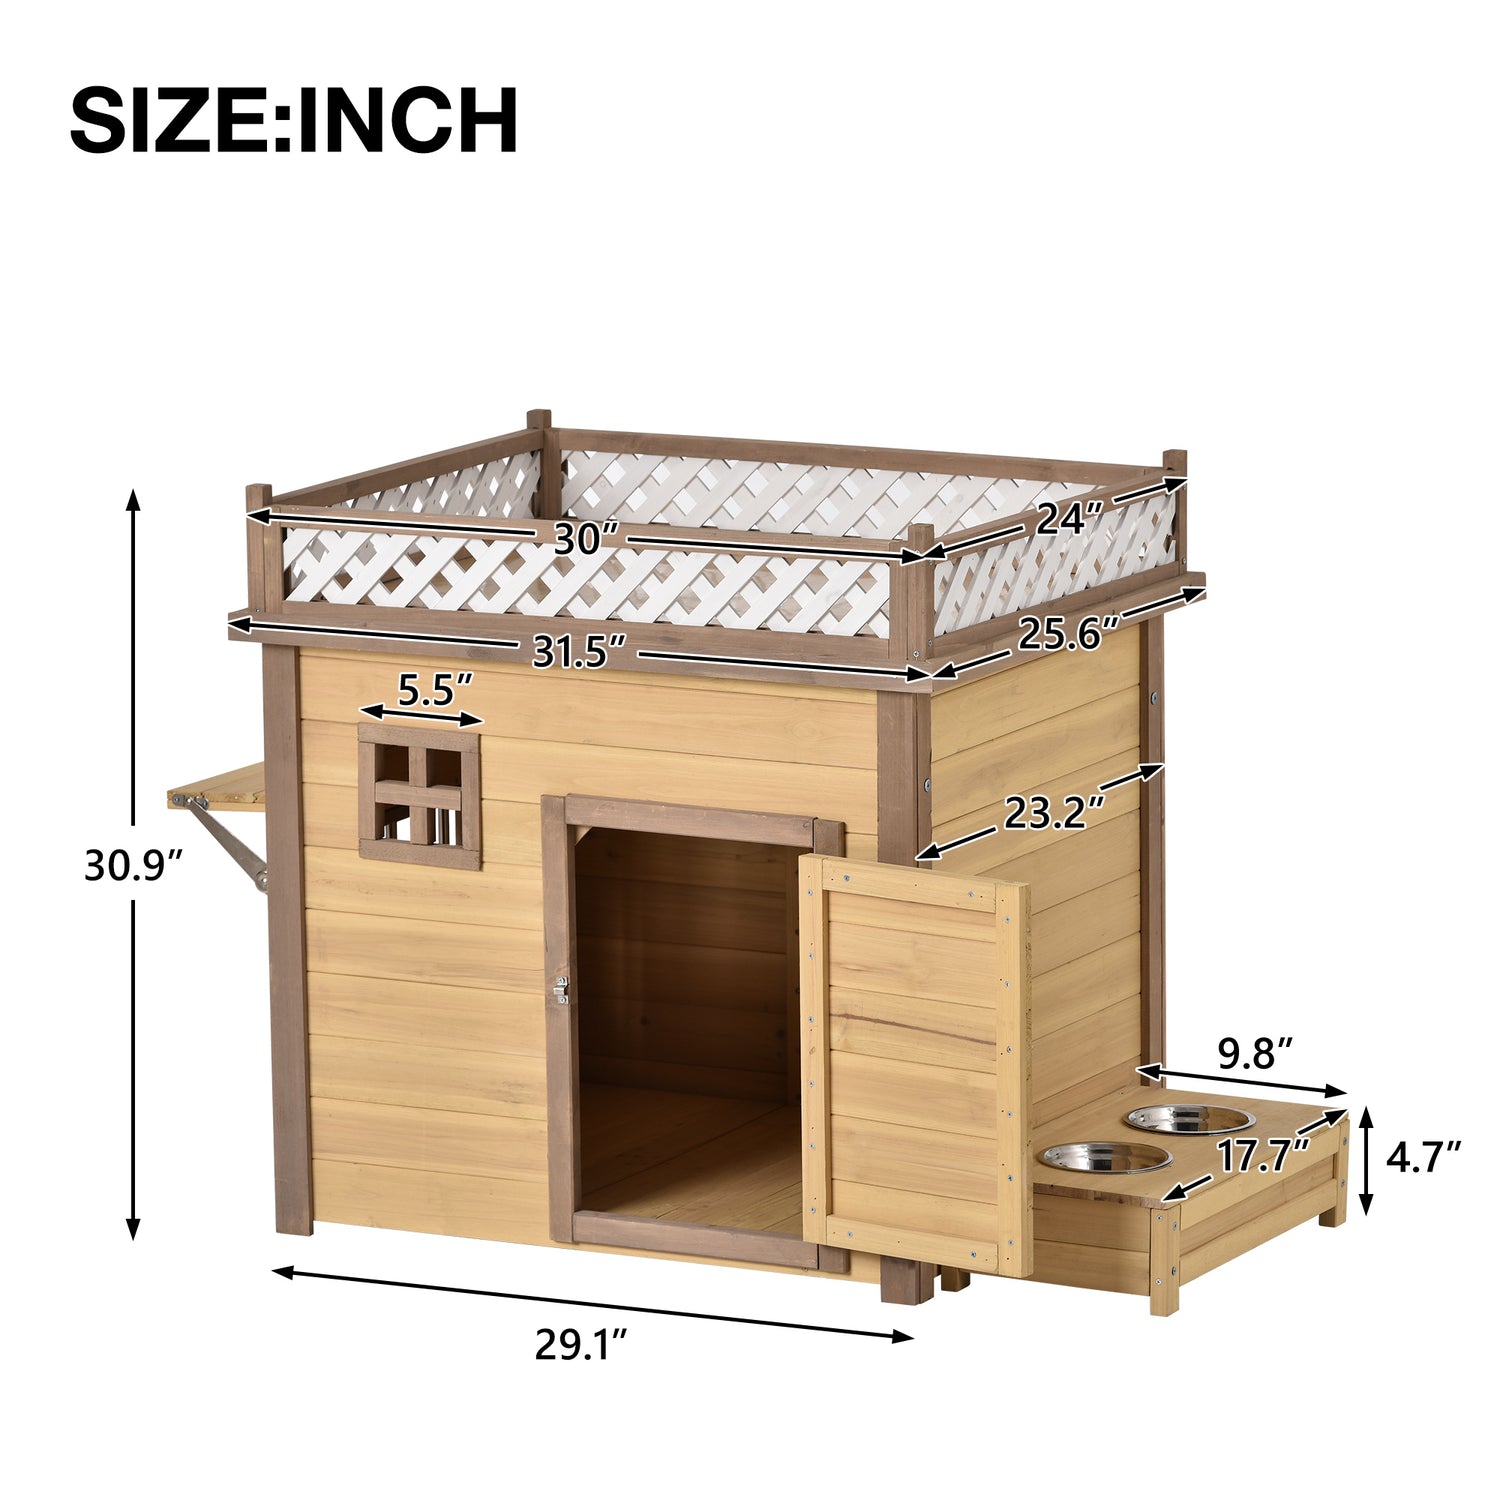 CHURANTY 31.5” Wooden Puppy Pet Dog House Wood Room Puppy Shelter Kennel Outdoor & Indoor Dog Crate, with Flower Stand, Plant Stand, with Wood Feeder